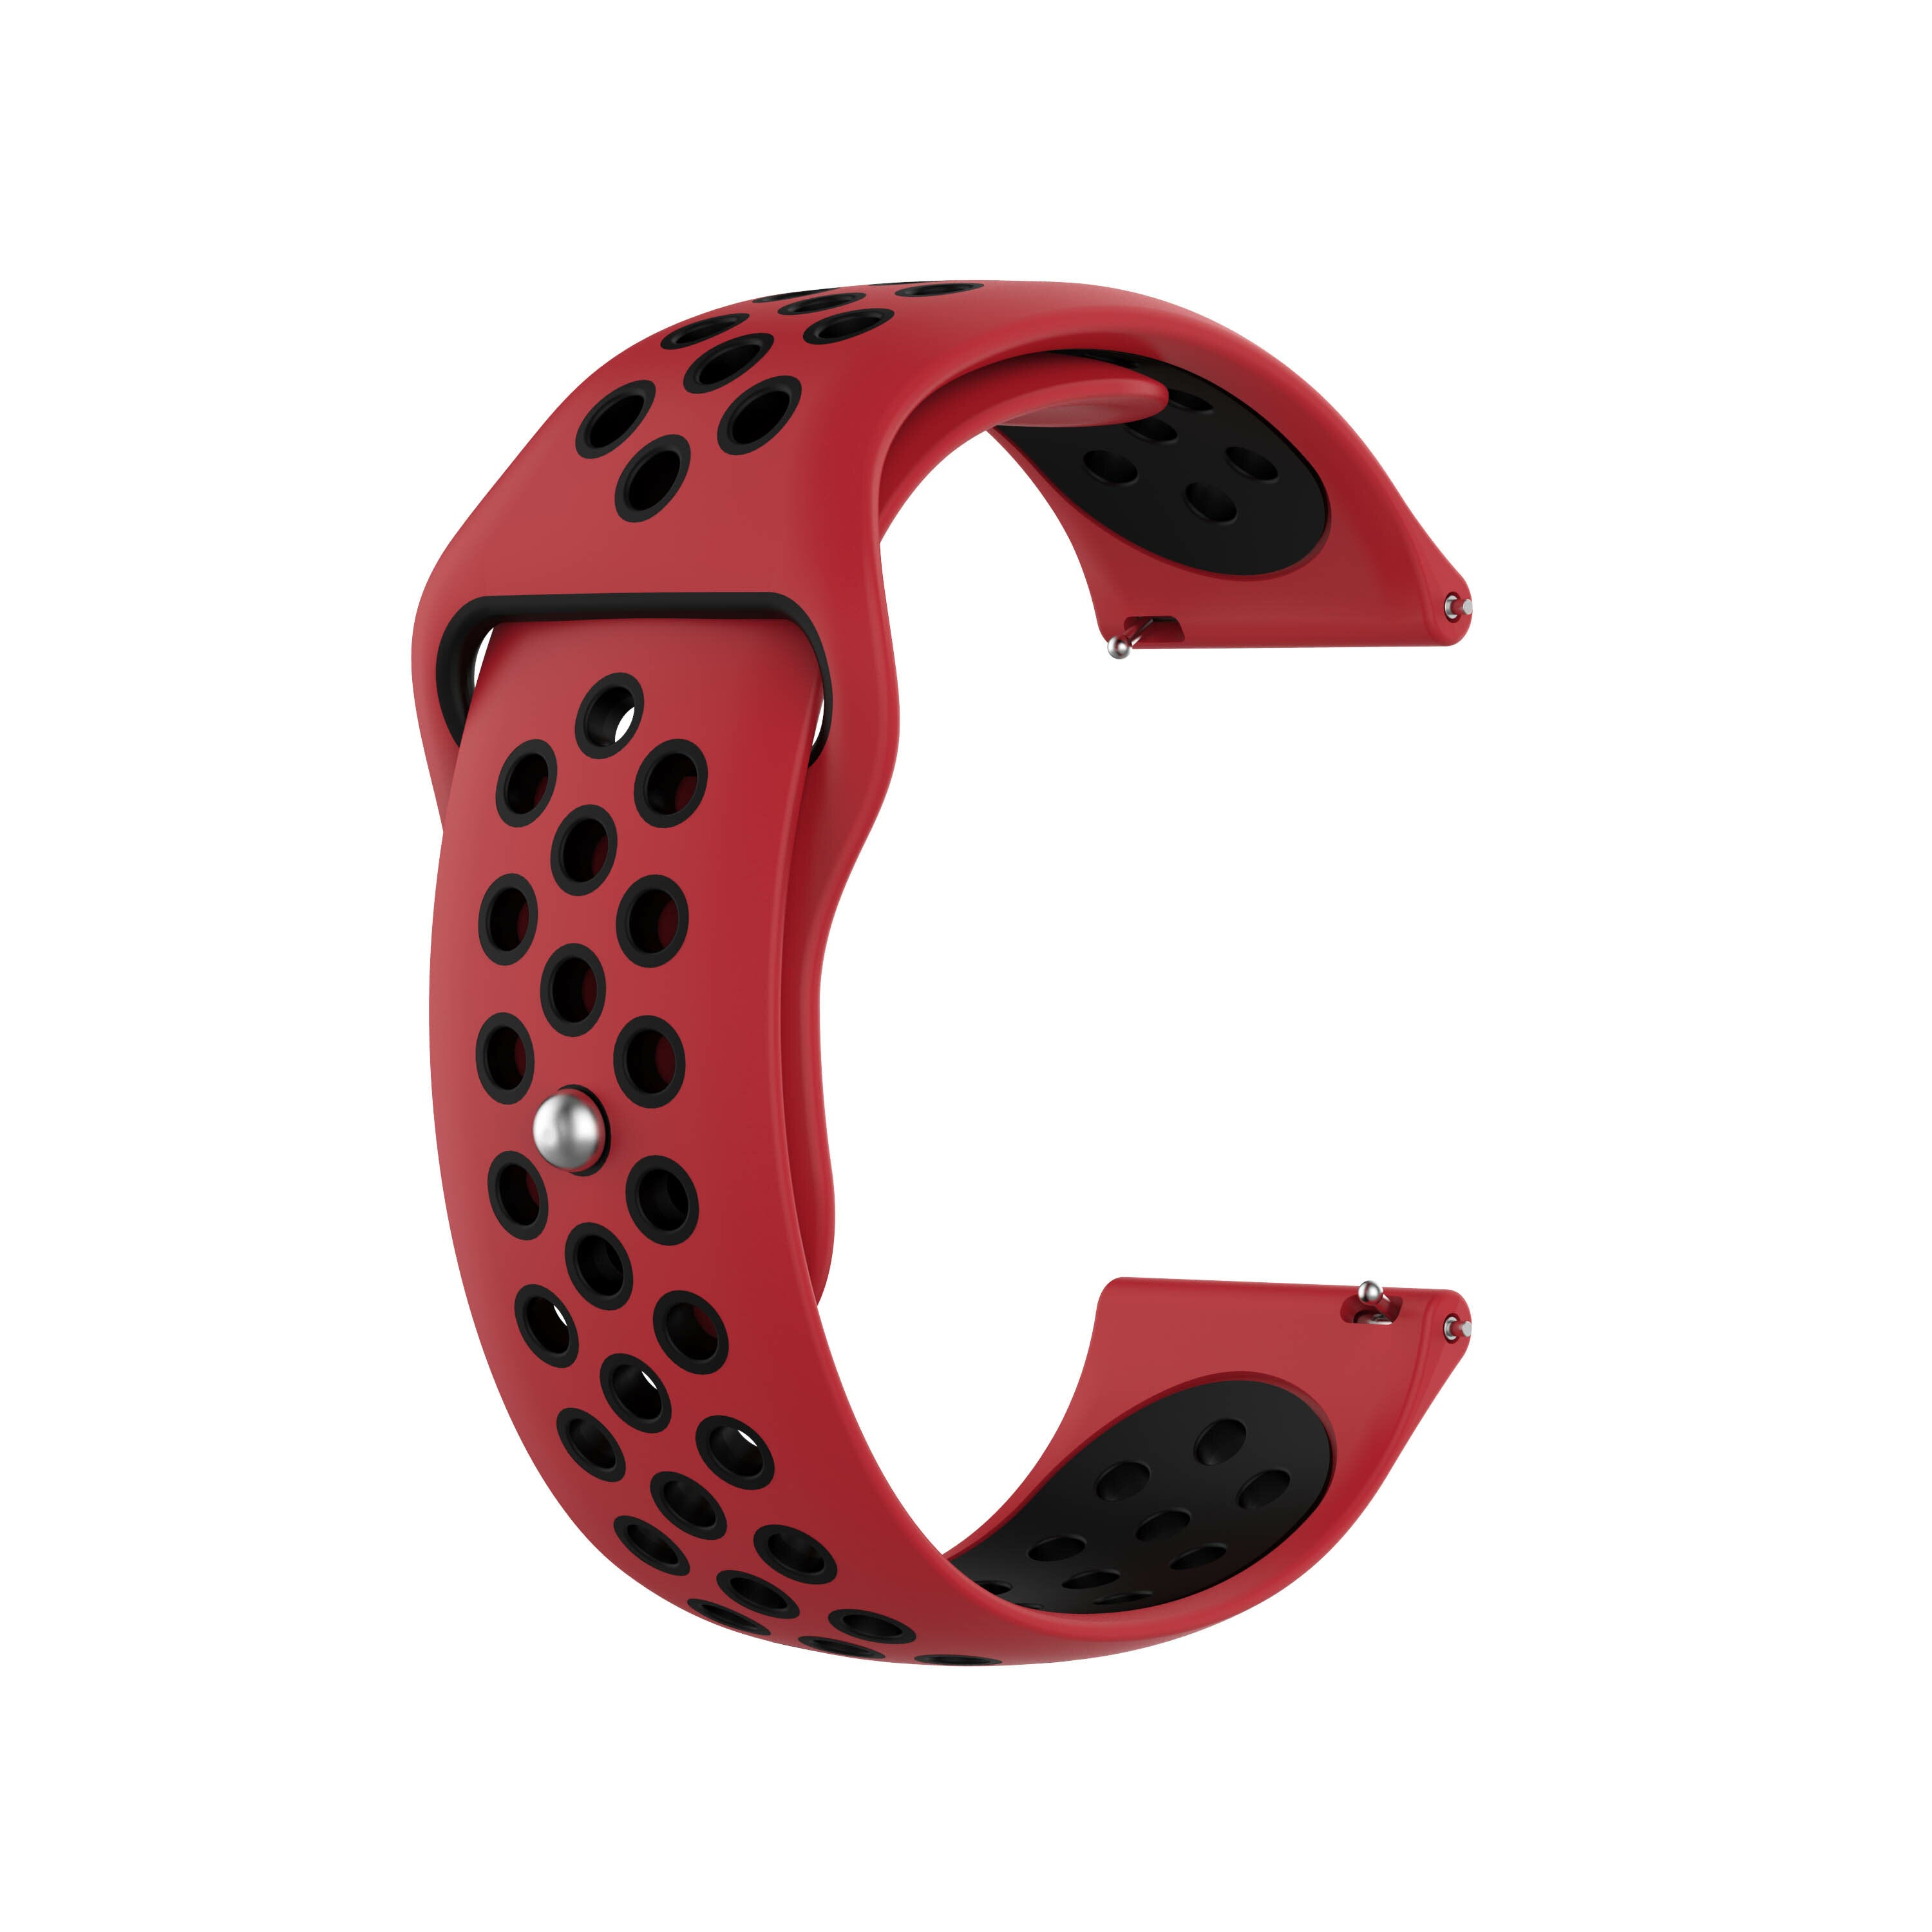 Two-color breathable Silicone Replacement Strap Smart Watch Band For Fitbit Versa 2